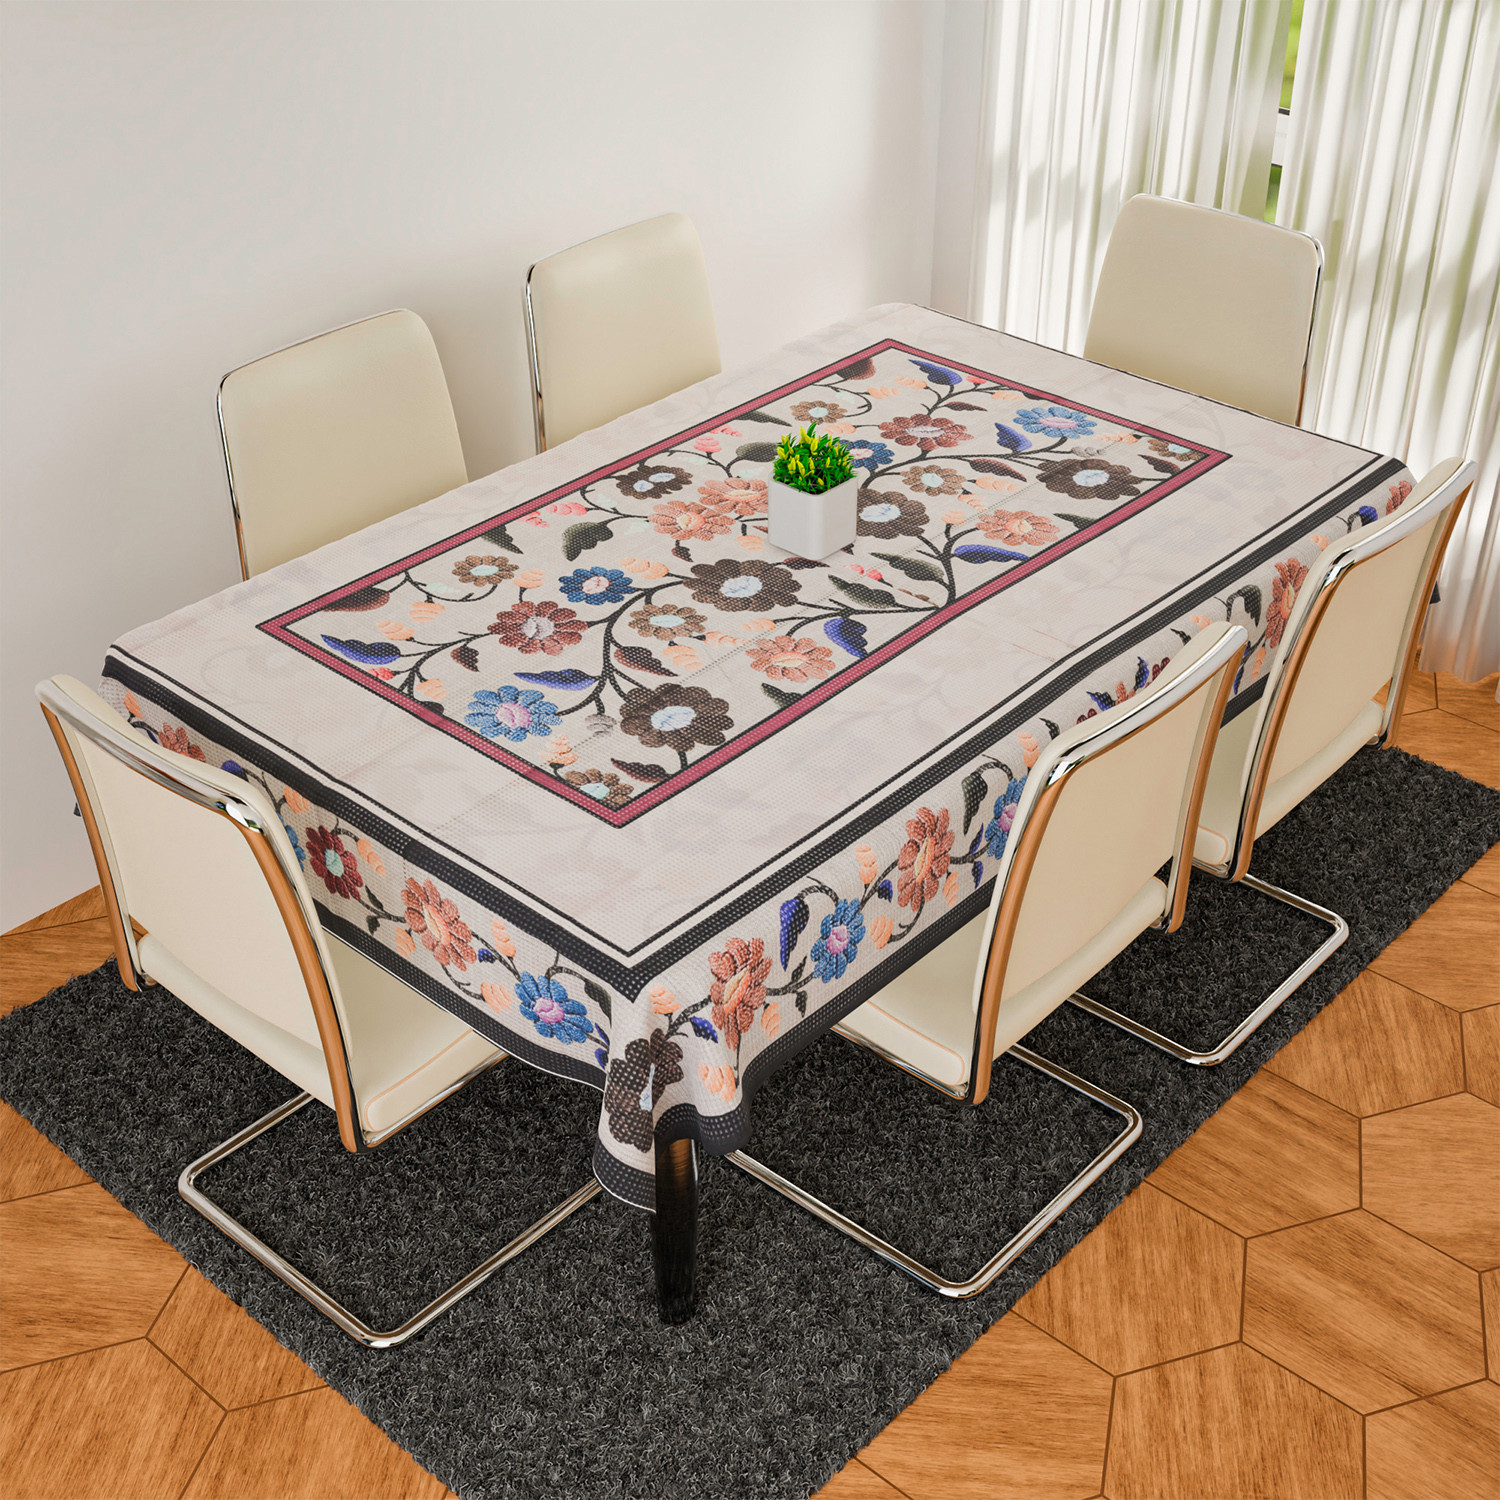 Kuber Industries Dining Table Cover | Digital Multi Flower Print Dining Table Cover | Self Check Net Polyester Dining Table Cover for Home Décor | 60x90 | Beige